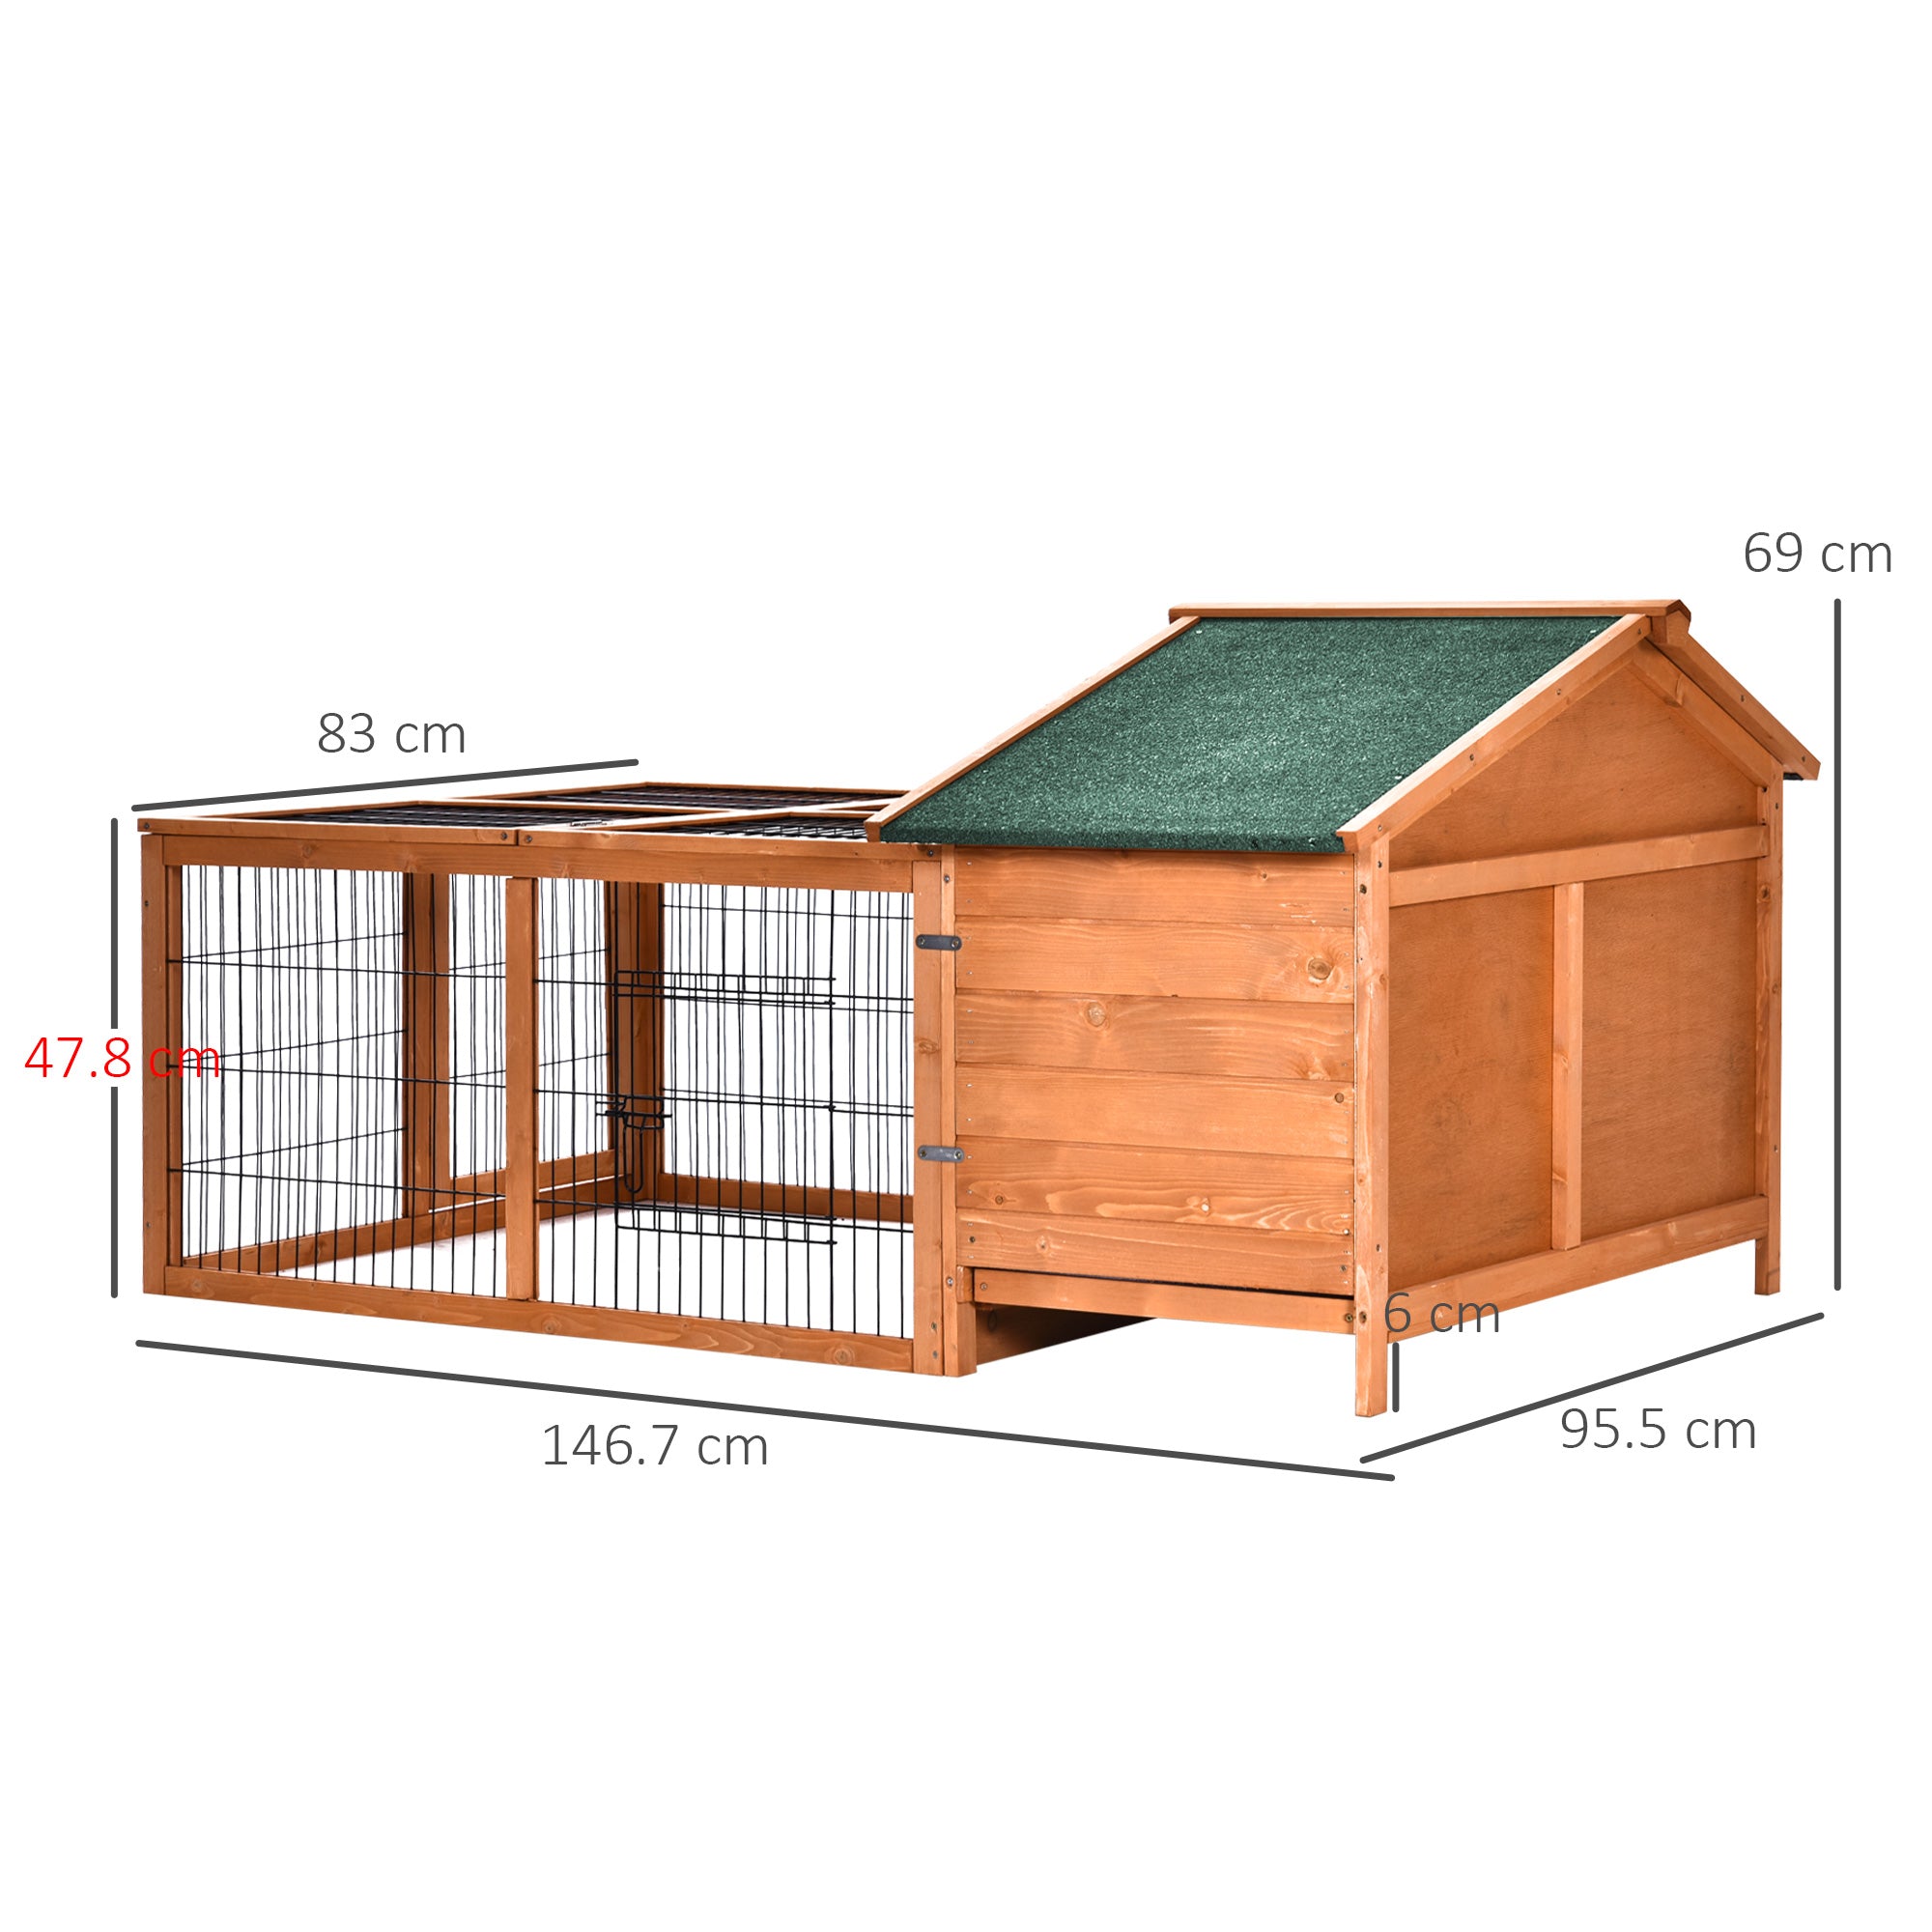 Wooden Rabbit Hutch Detachable Rabbit Cage Pet House with Openable Run & Roof Slide-out Tray